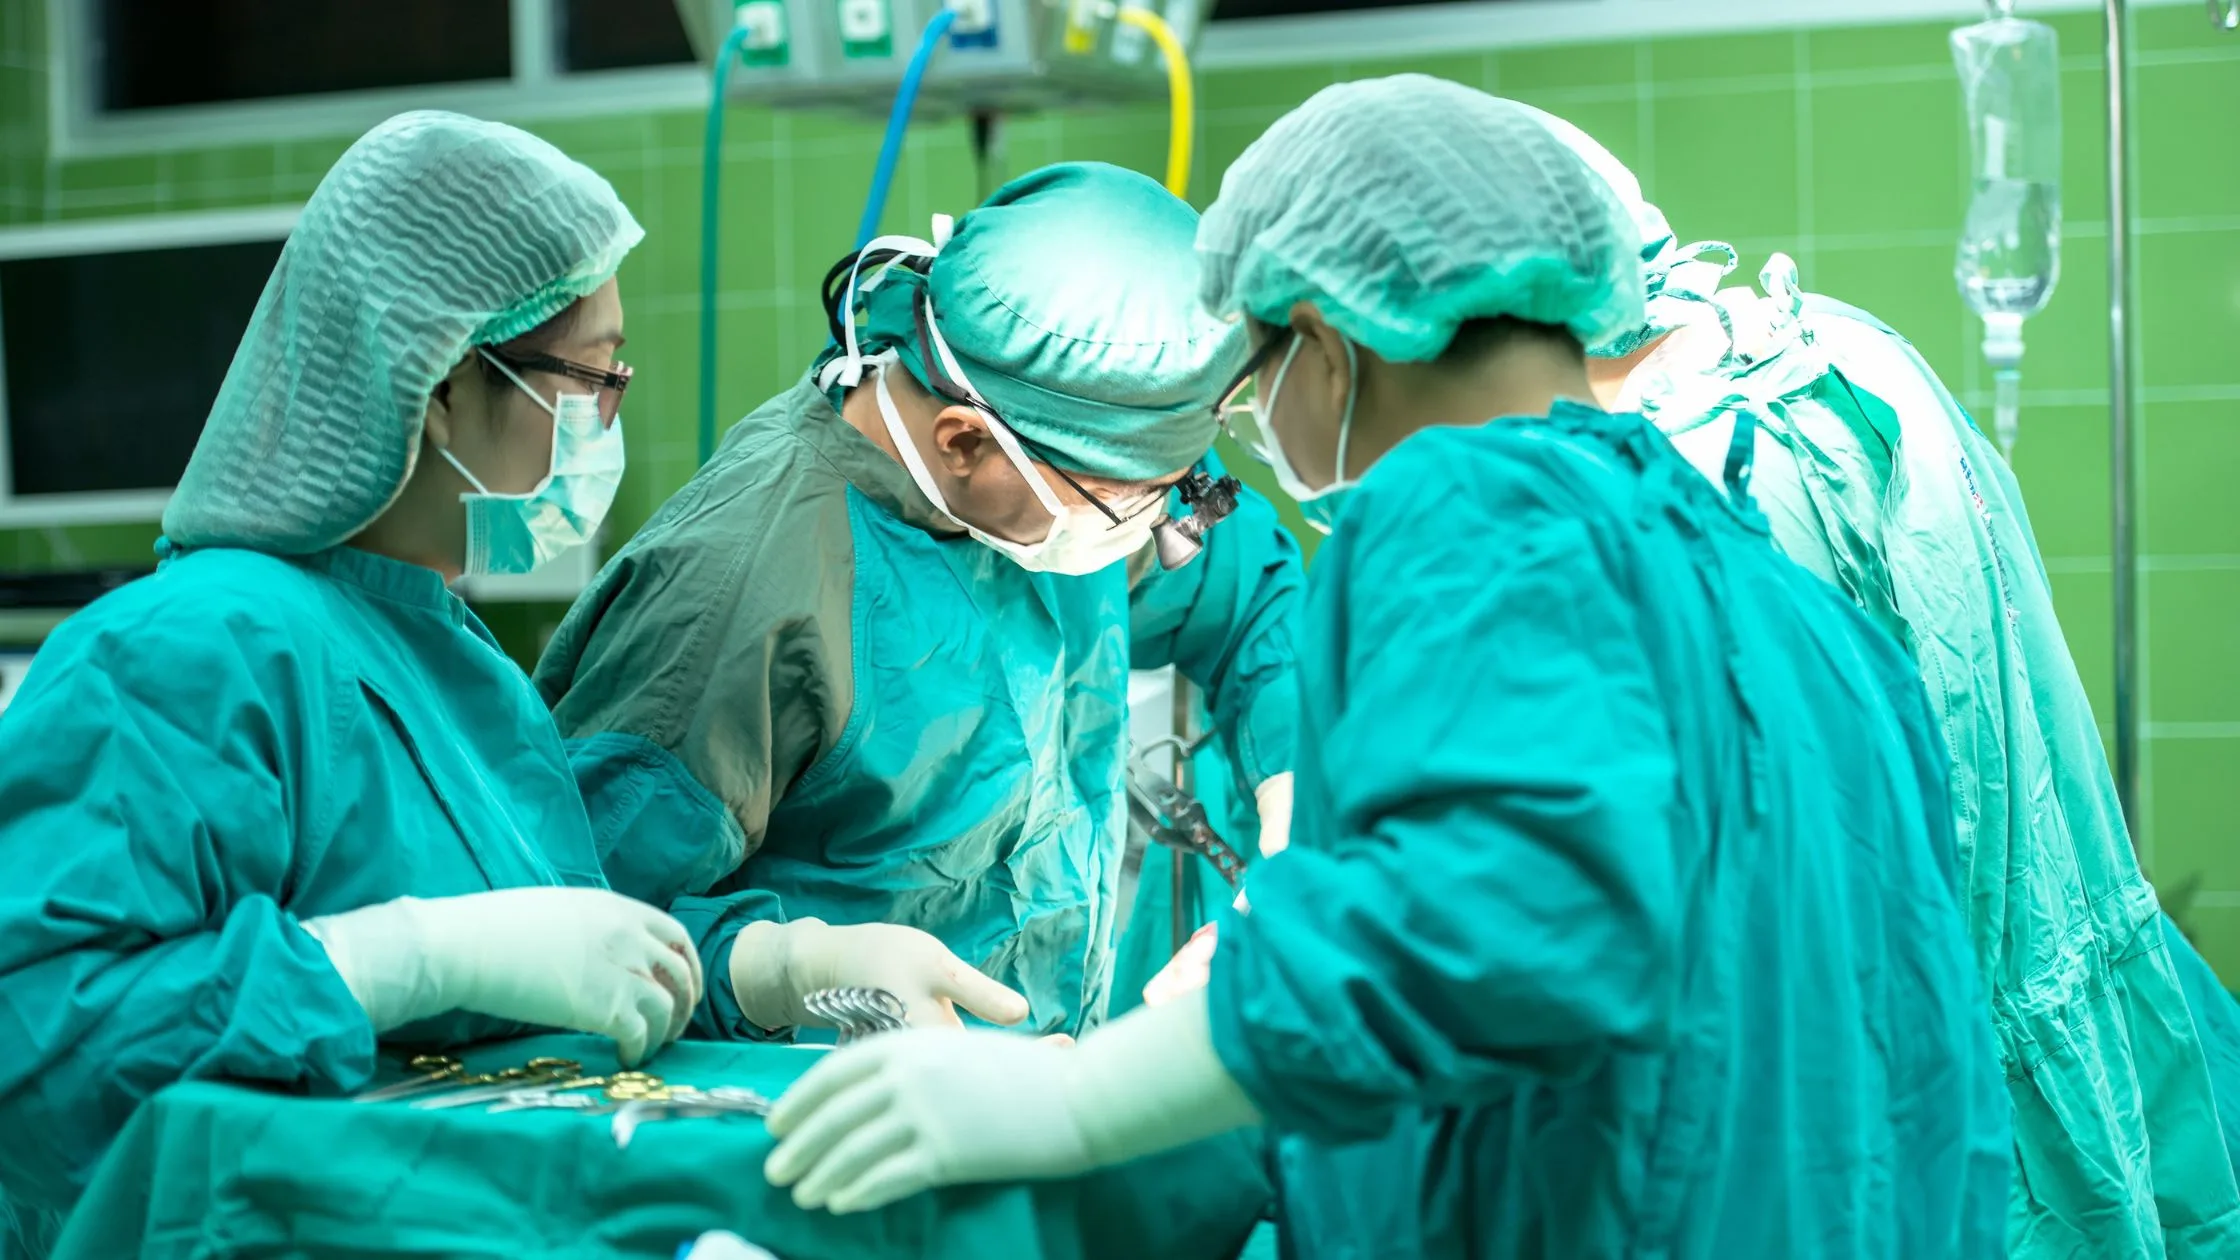 surgeons performing surgery wearing PPE protective clothing